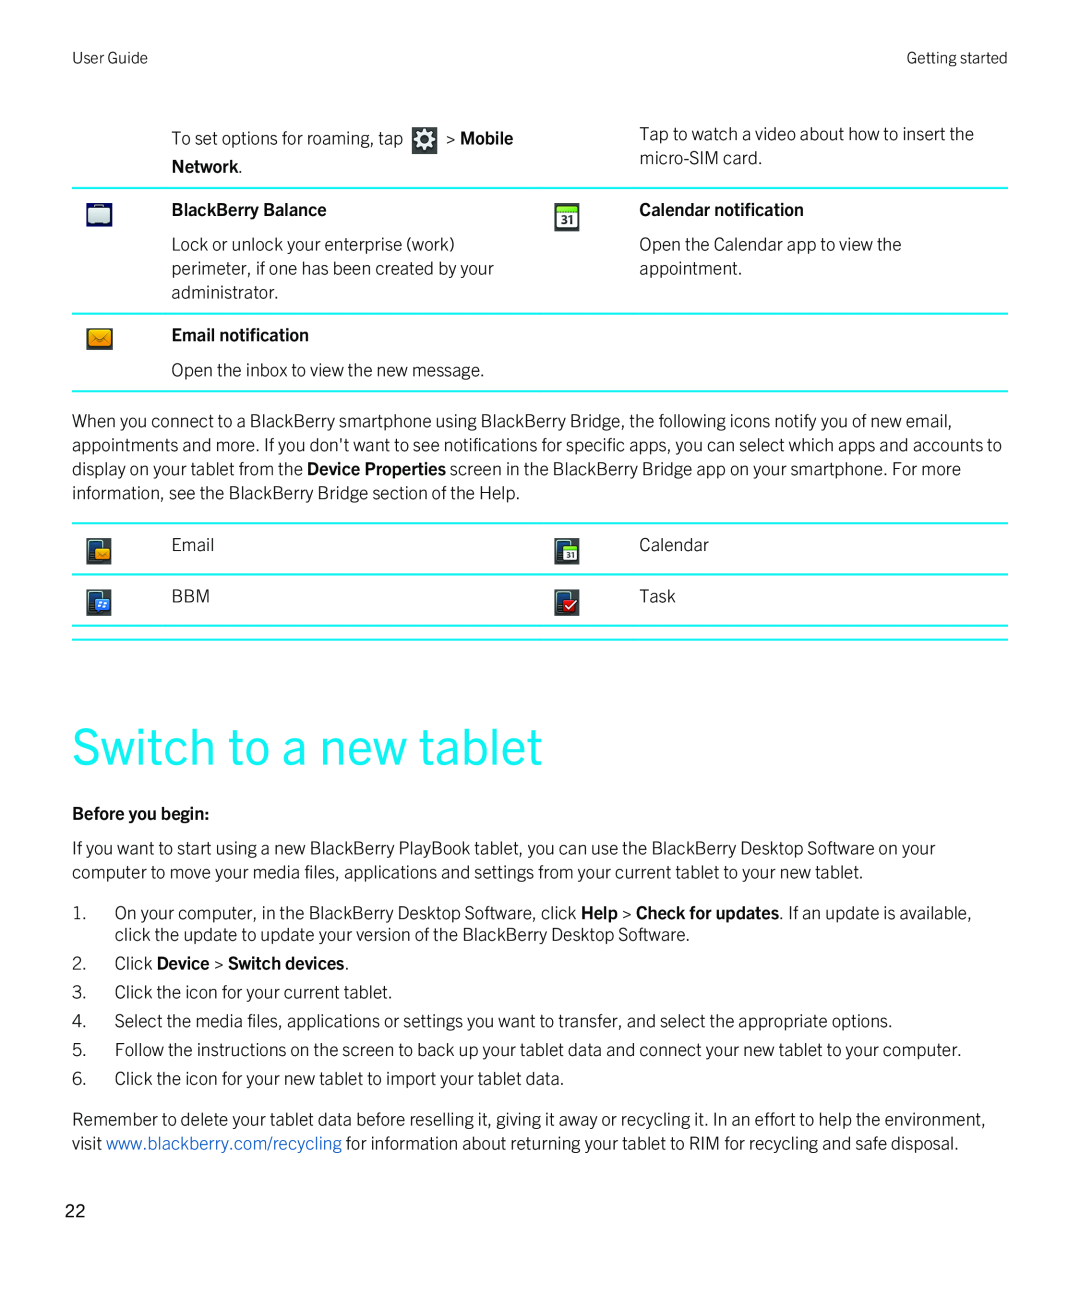 Blackberry 2.0.1 Switch to a new tablet, Mobile, Network, BlackBerry Balance, Calendar notification, Email notification 